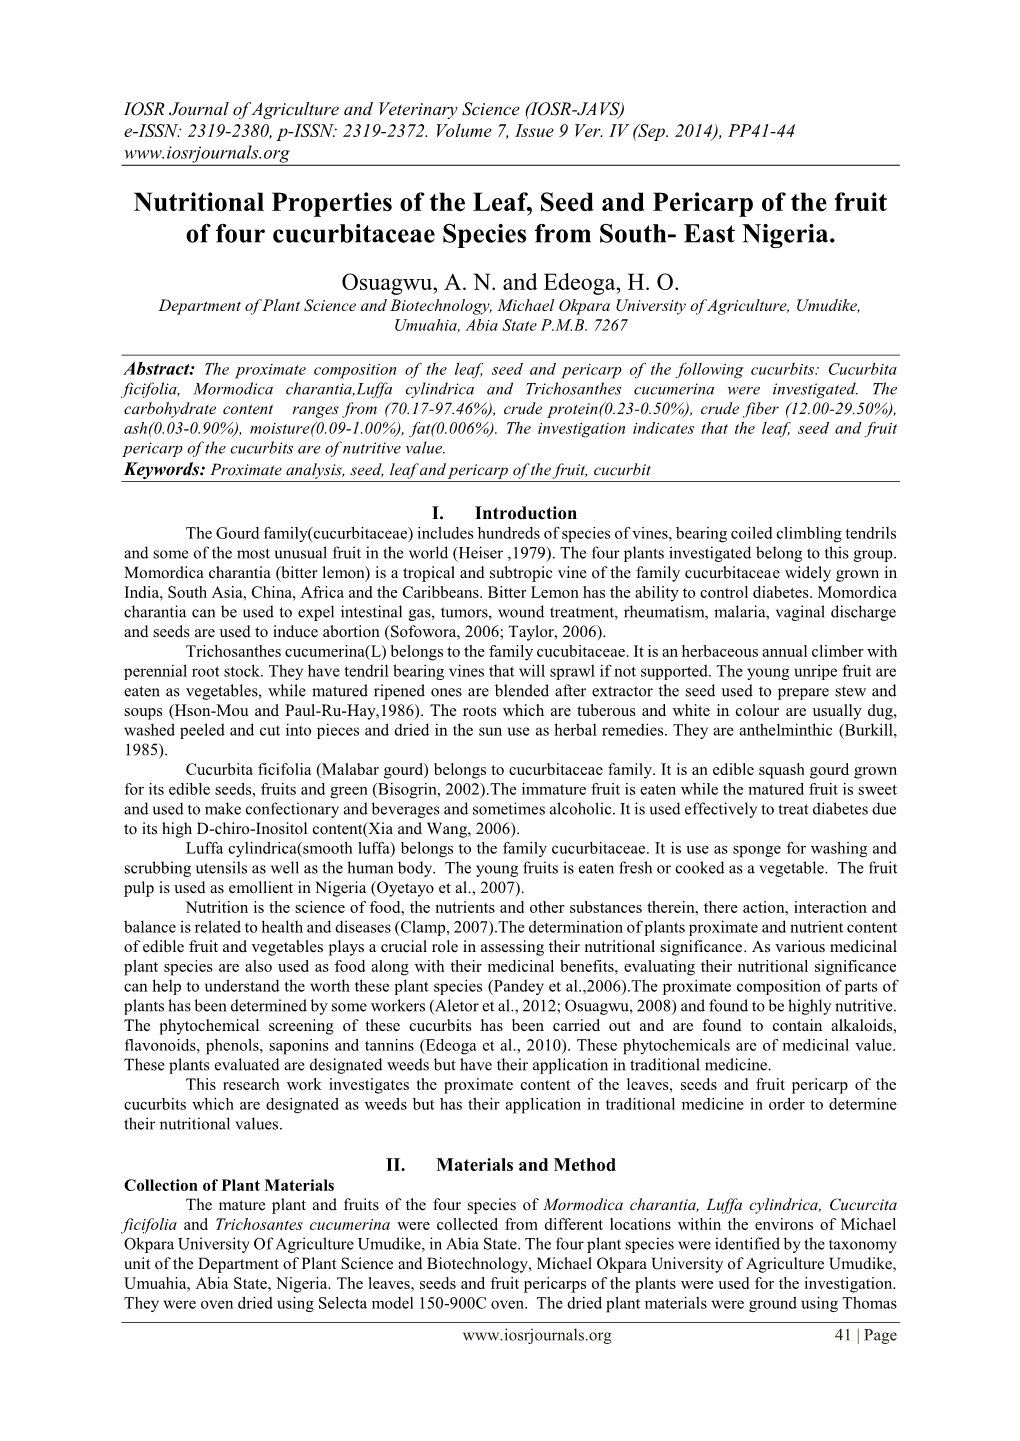 Nutritional Properties of the Leaf, Seed and Pericarp of the Fruit of Four Cucurbitaceae Species from South- East Nigeria